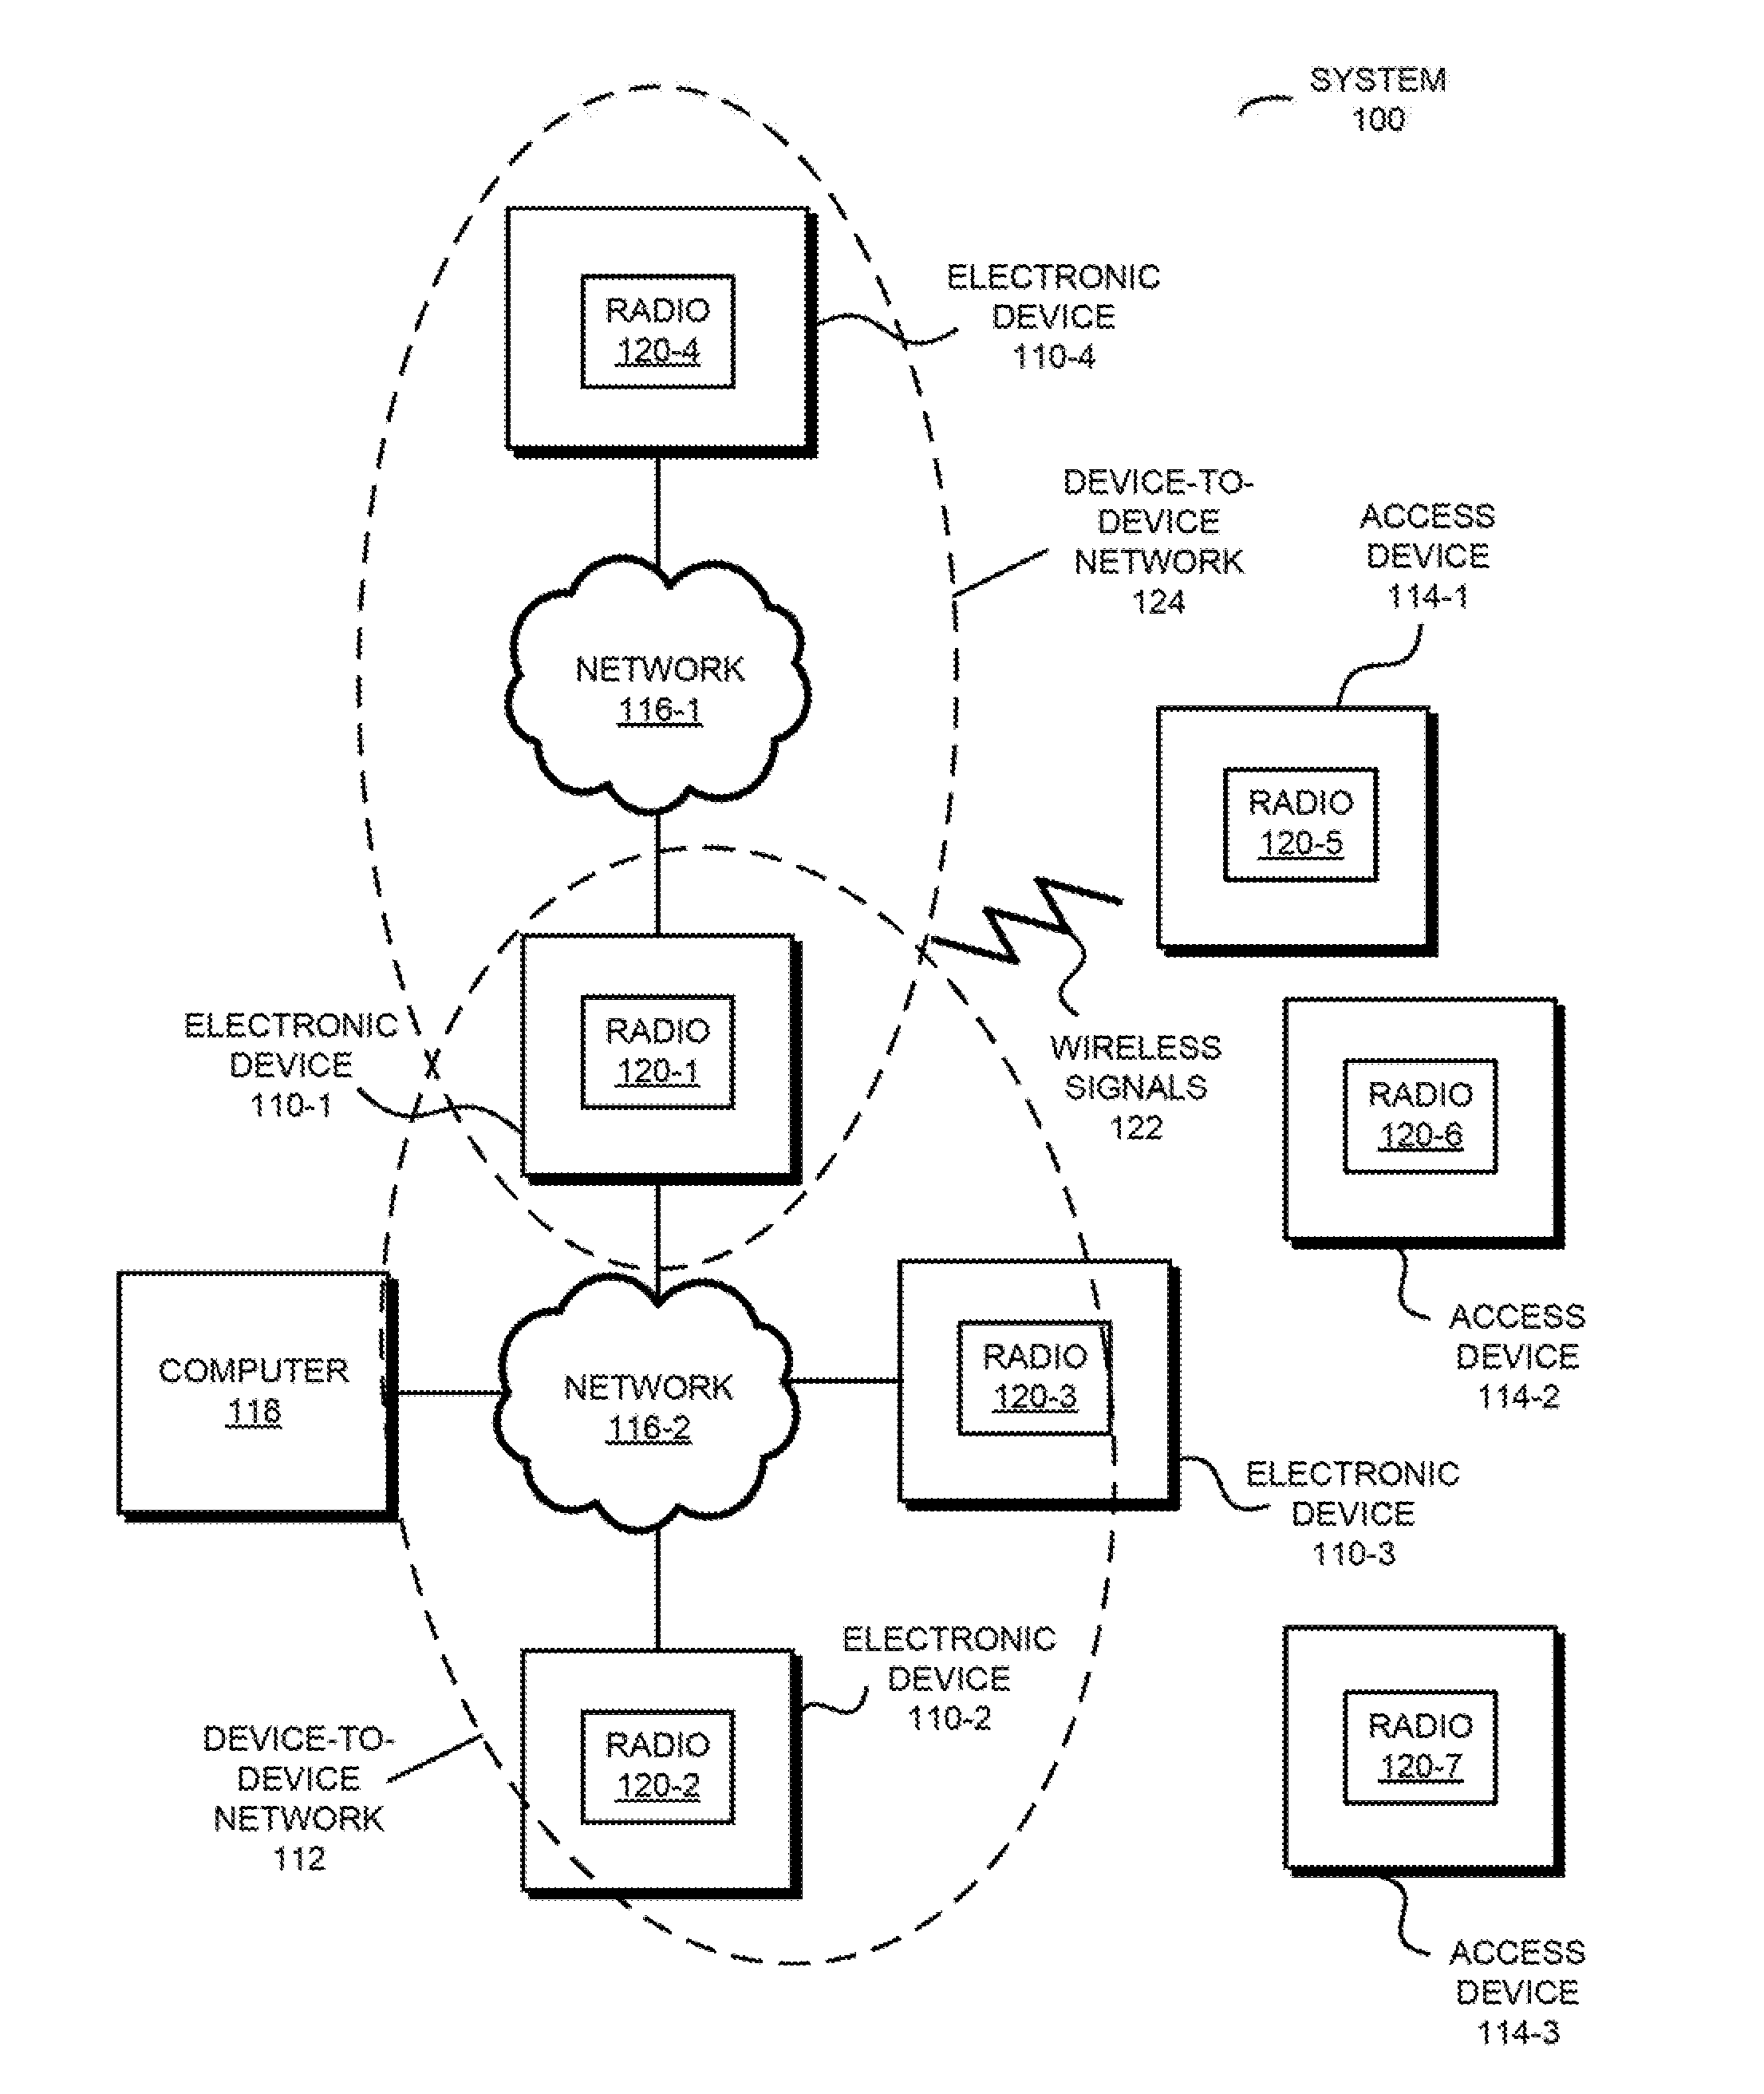 Secure Distributed Device-to-Device Network